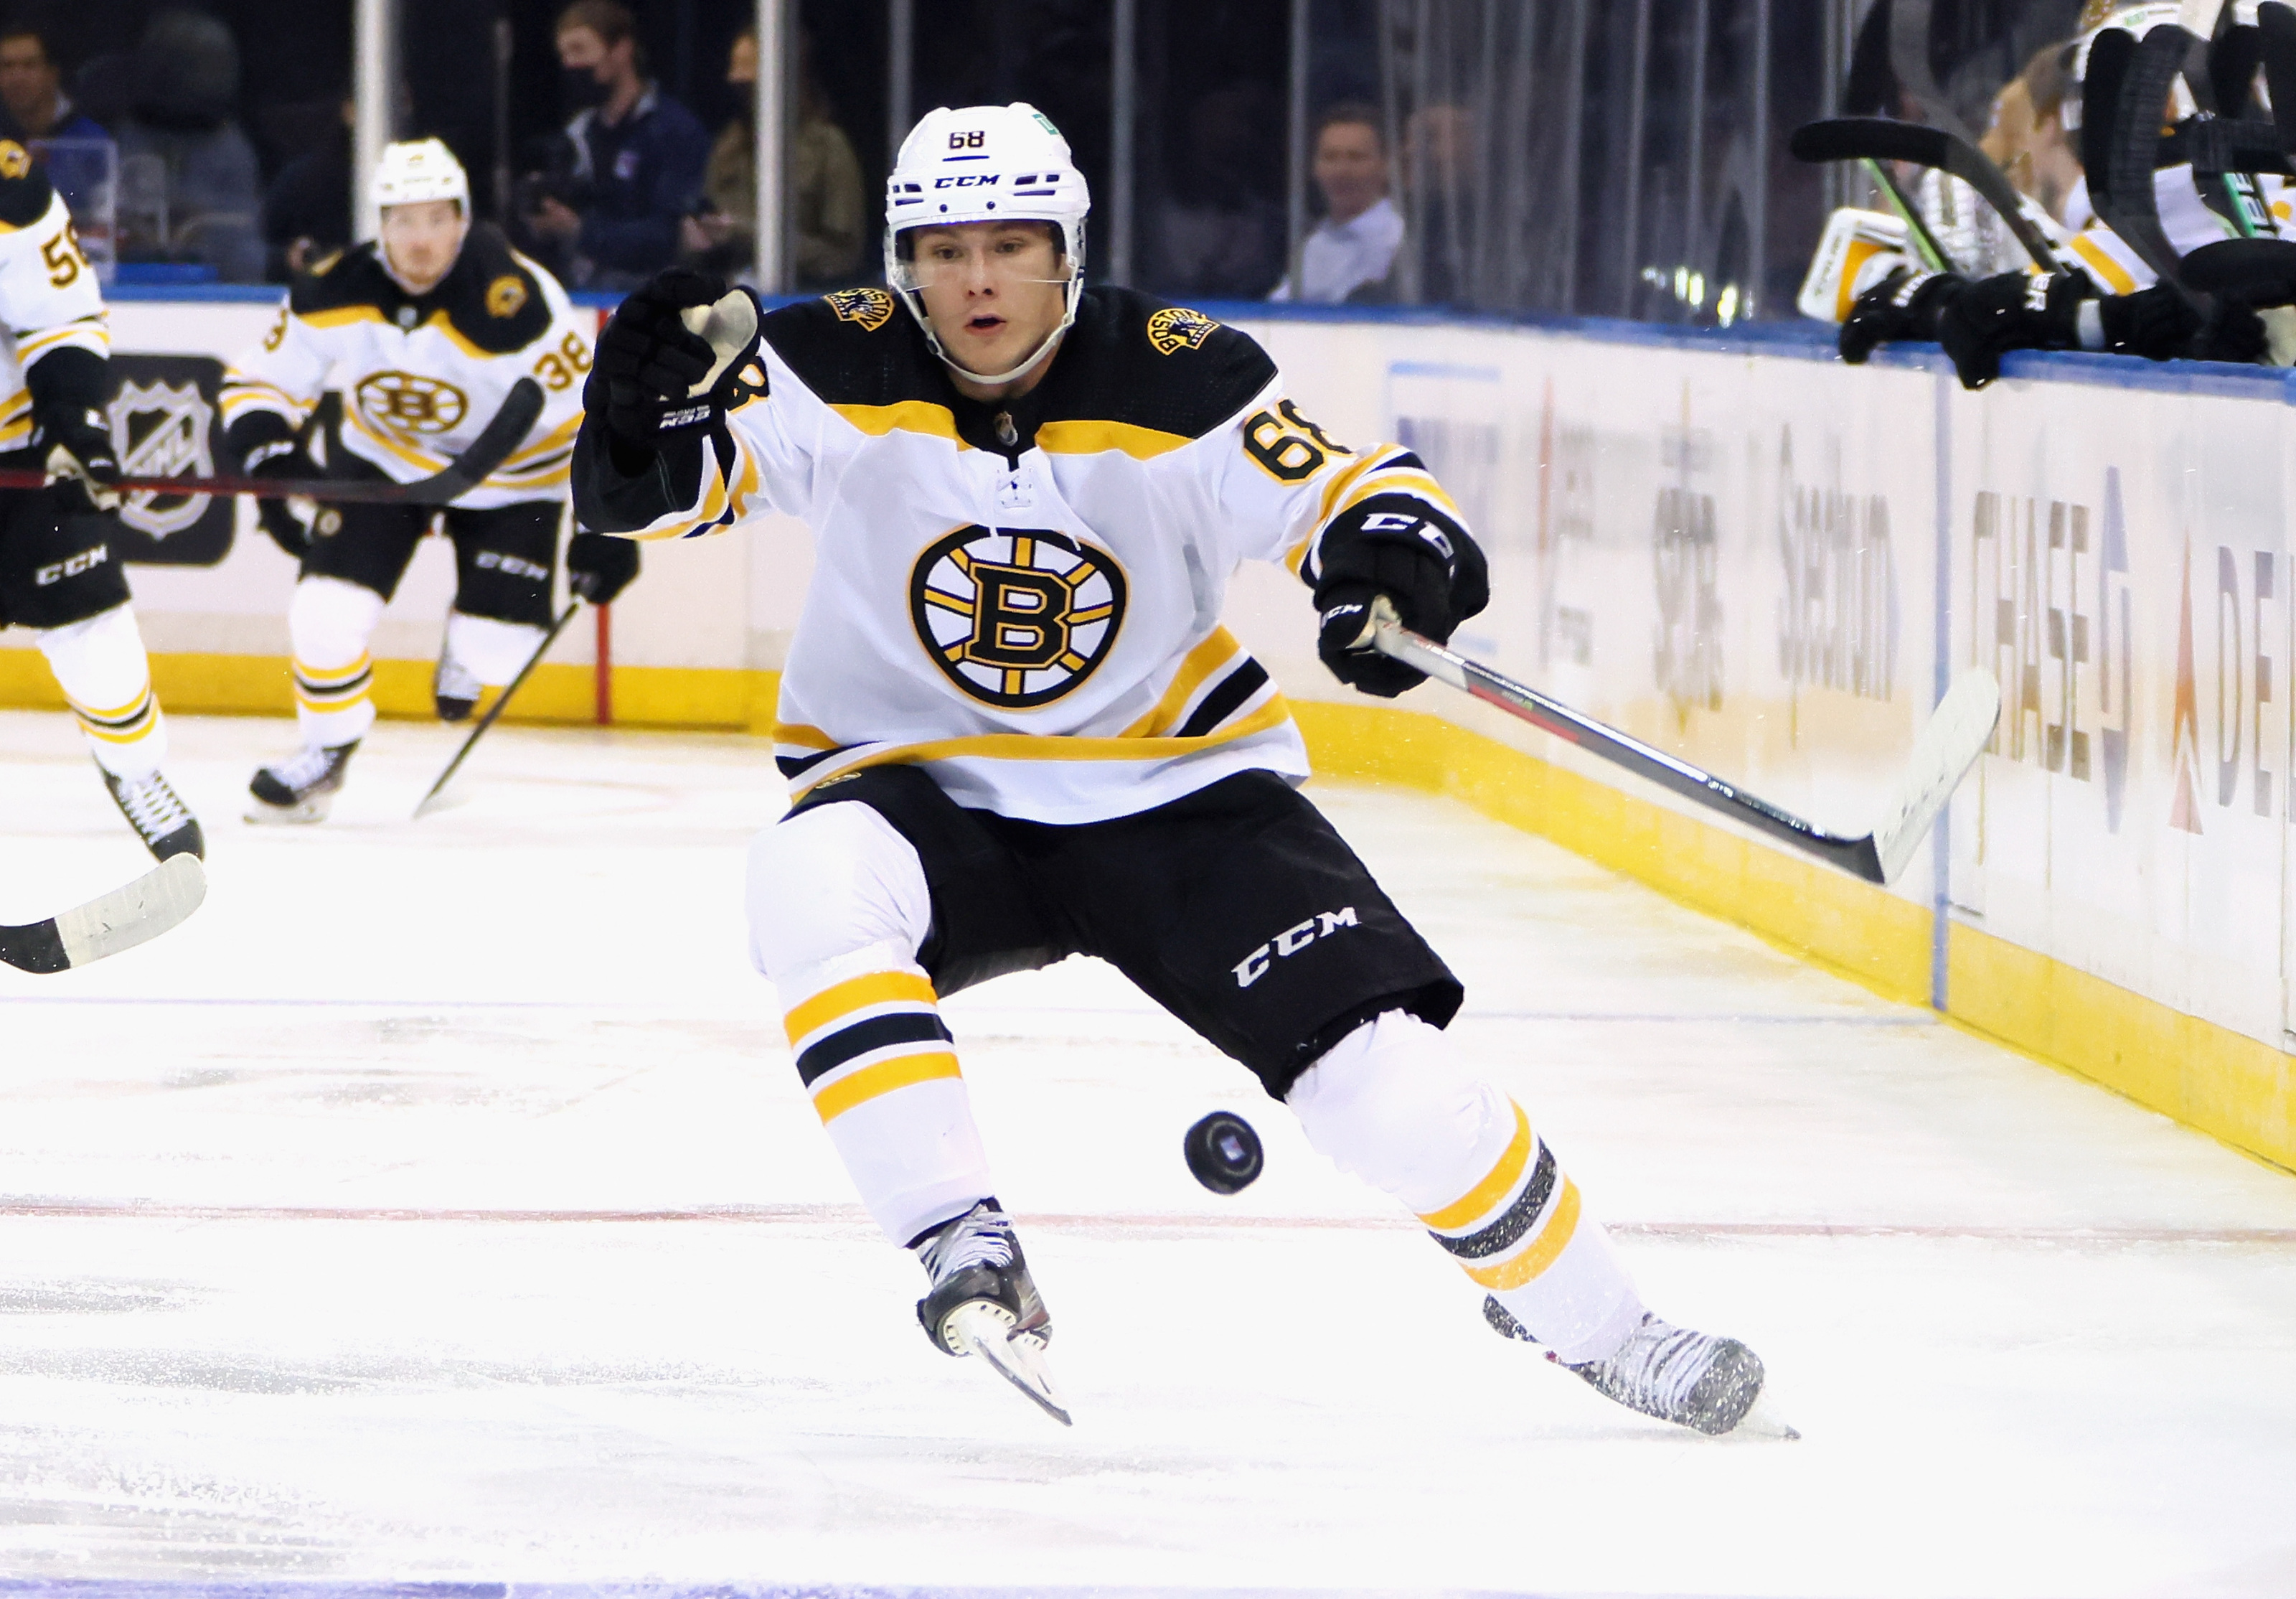 Boston Bruins 2021 main camp: How these x-factor players could